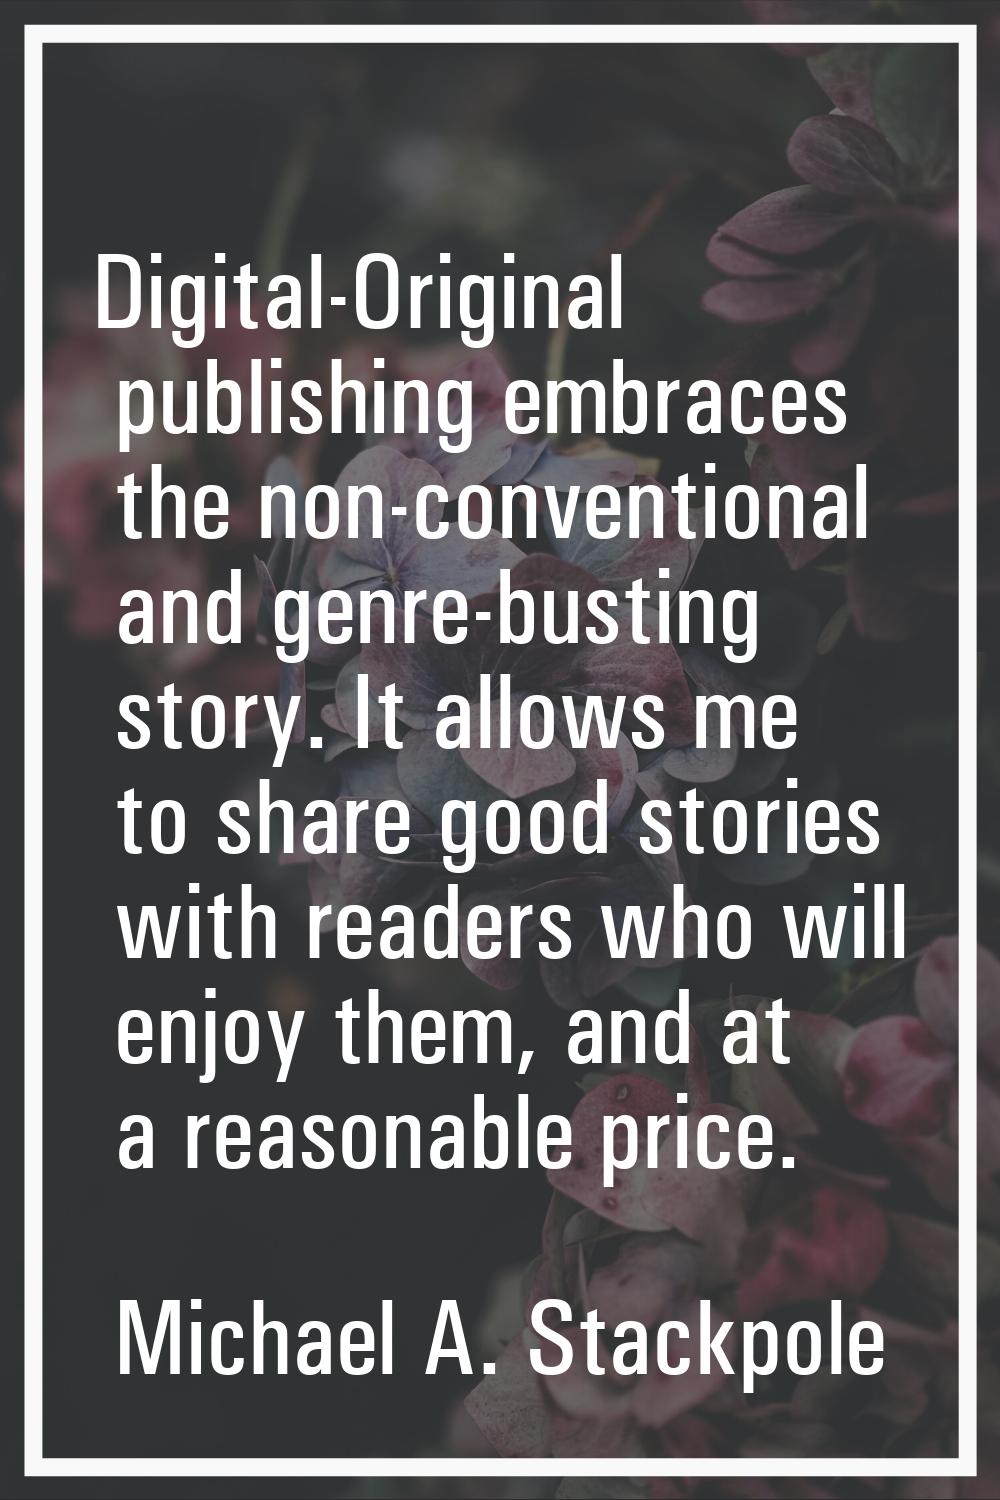 Digital-Original publishing embraces the non-conventional and genre-busting story. It allows me to 